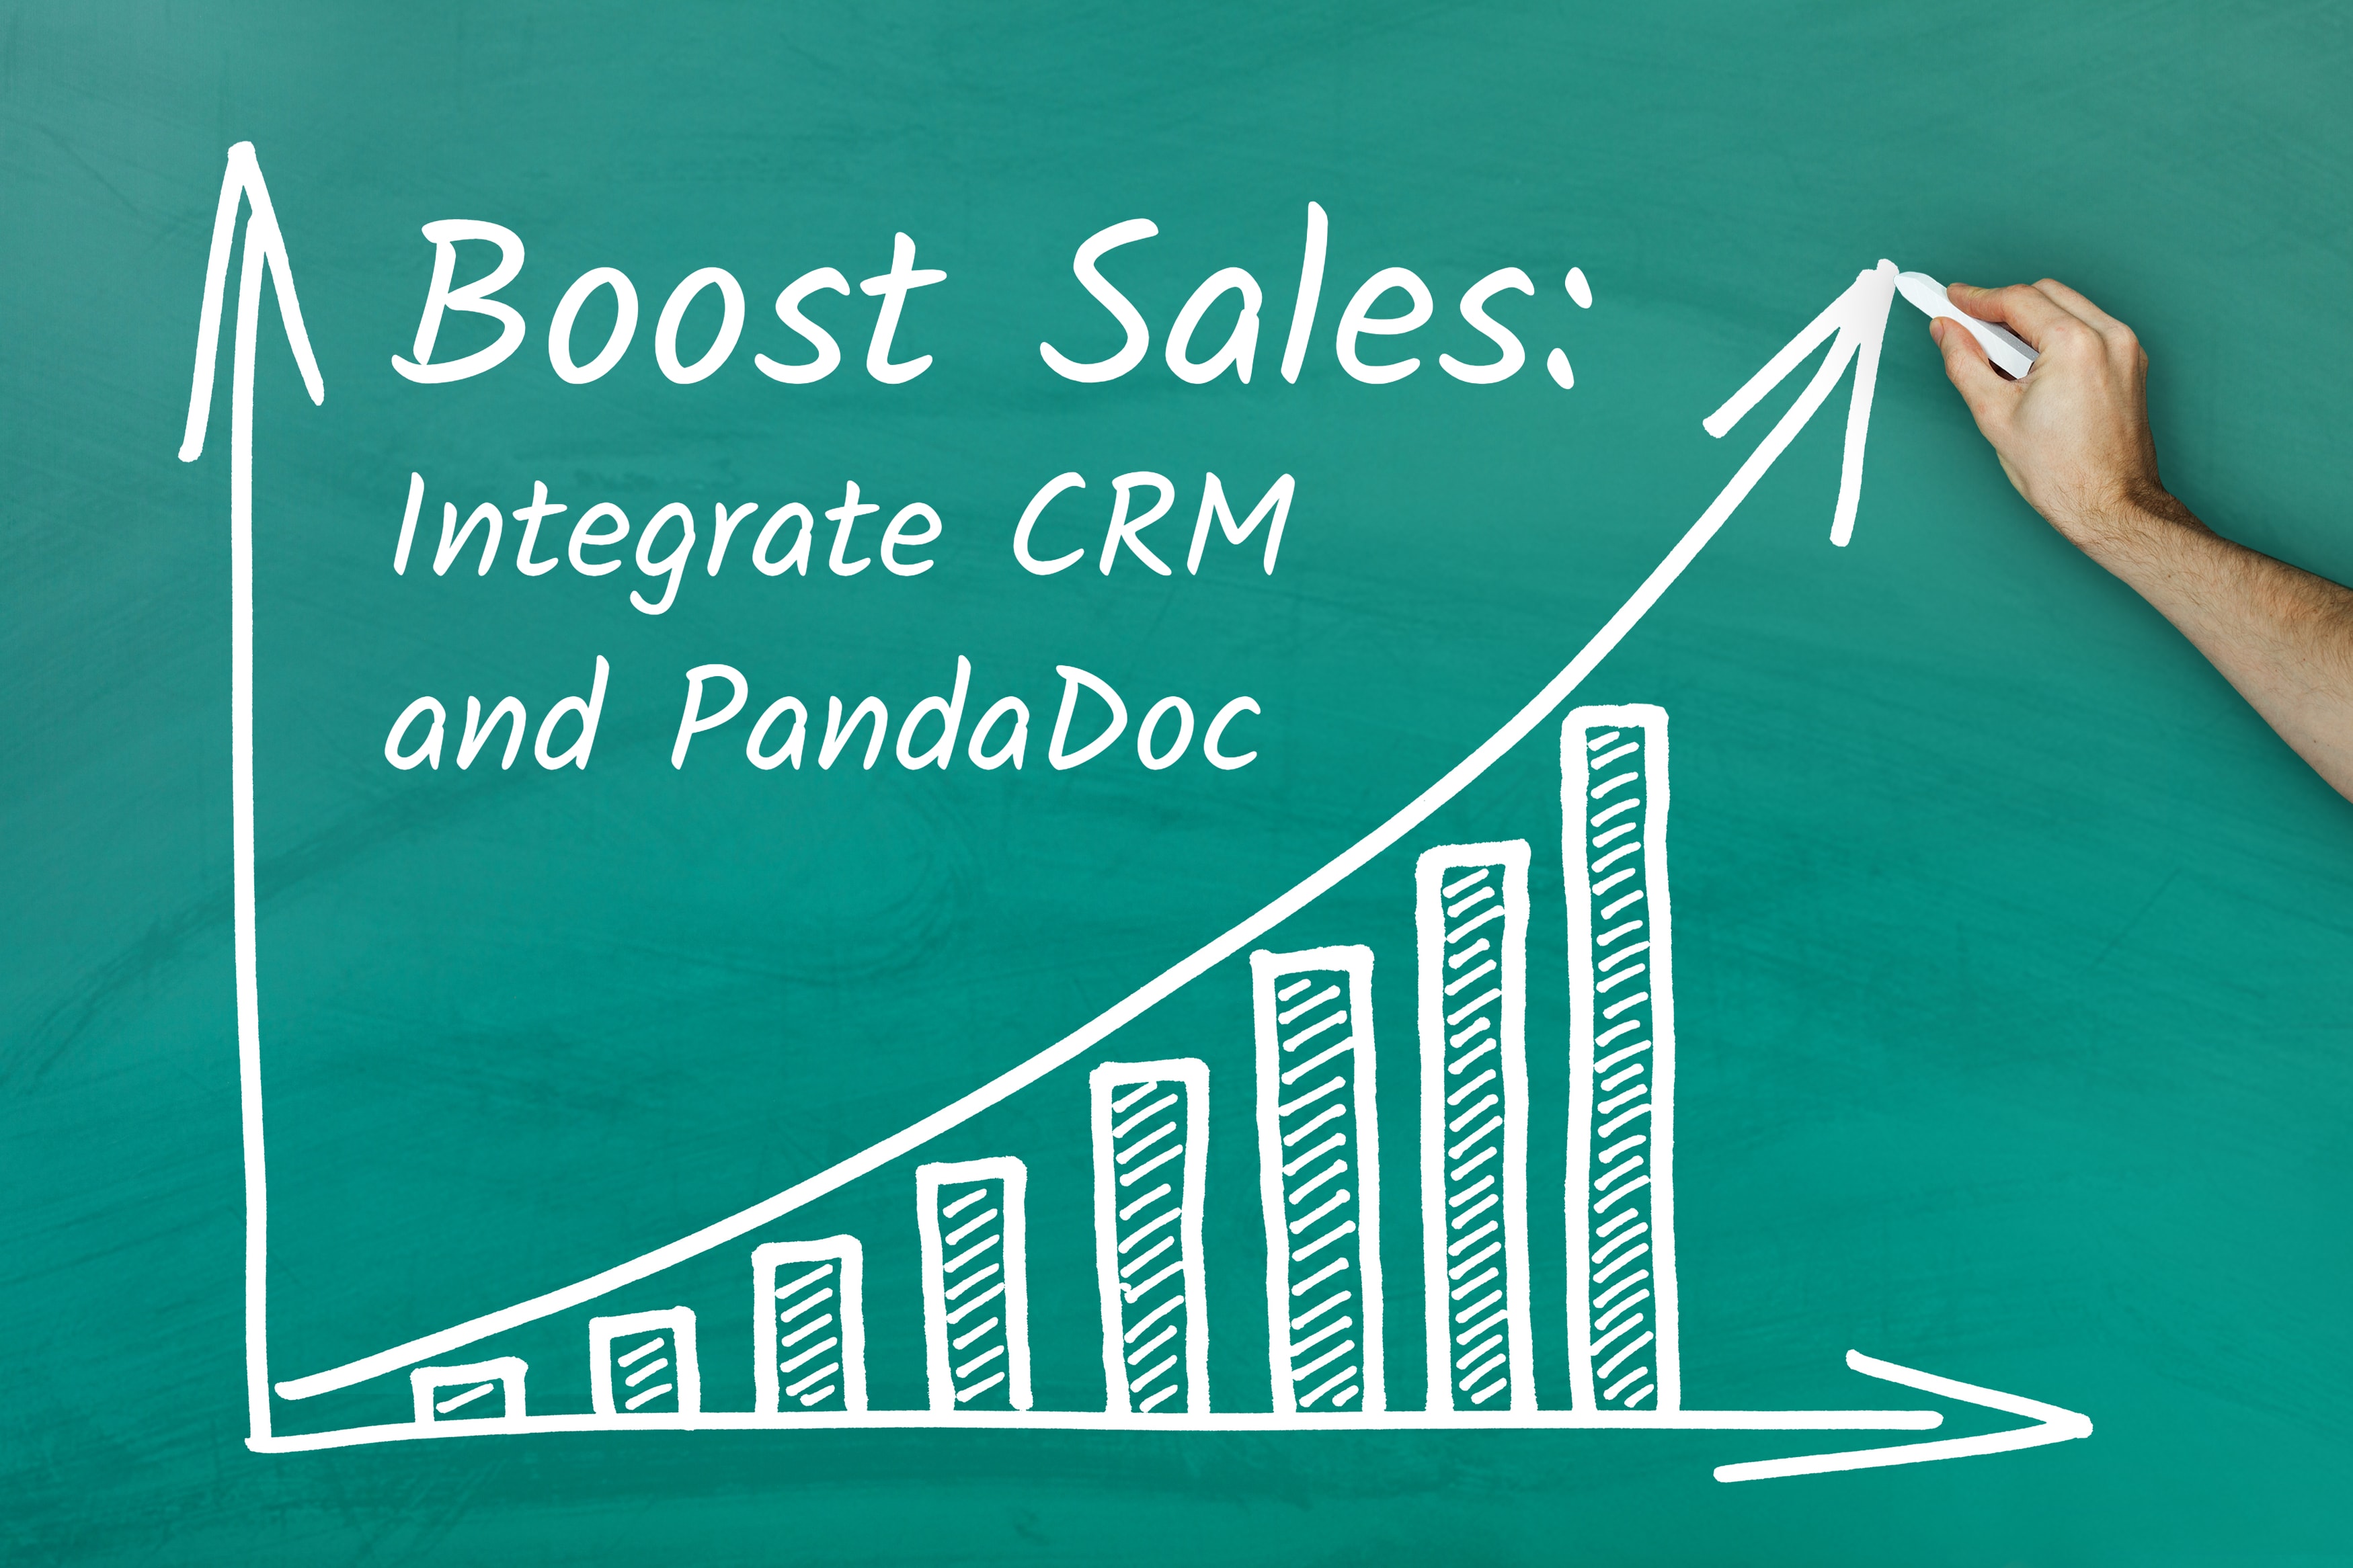 Integrate CRM and PandaDoc to Drive Sales